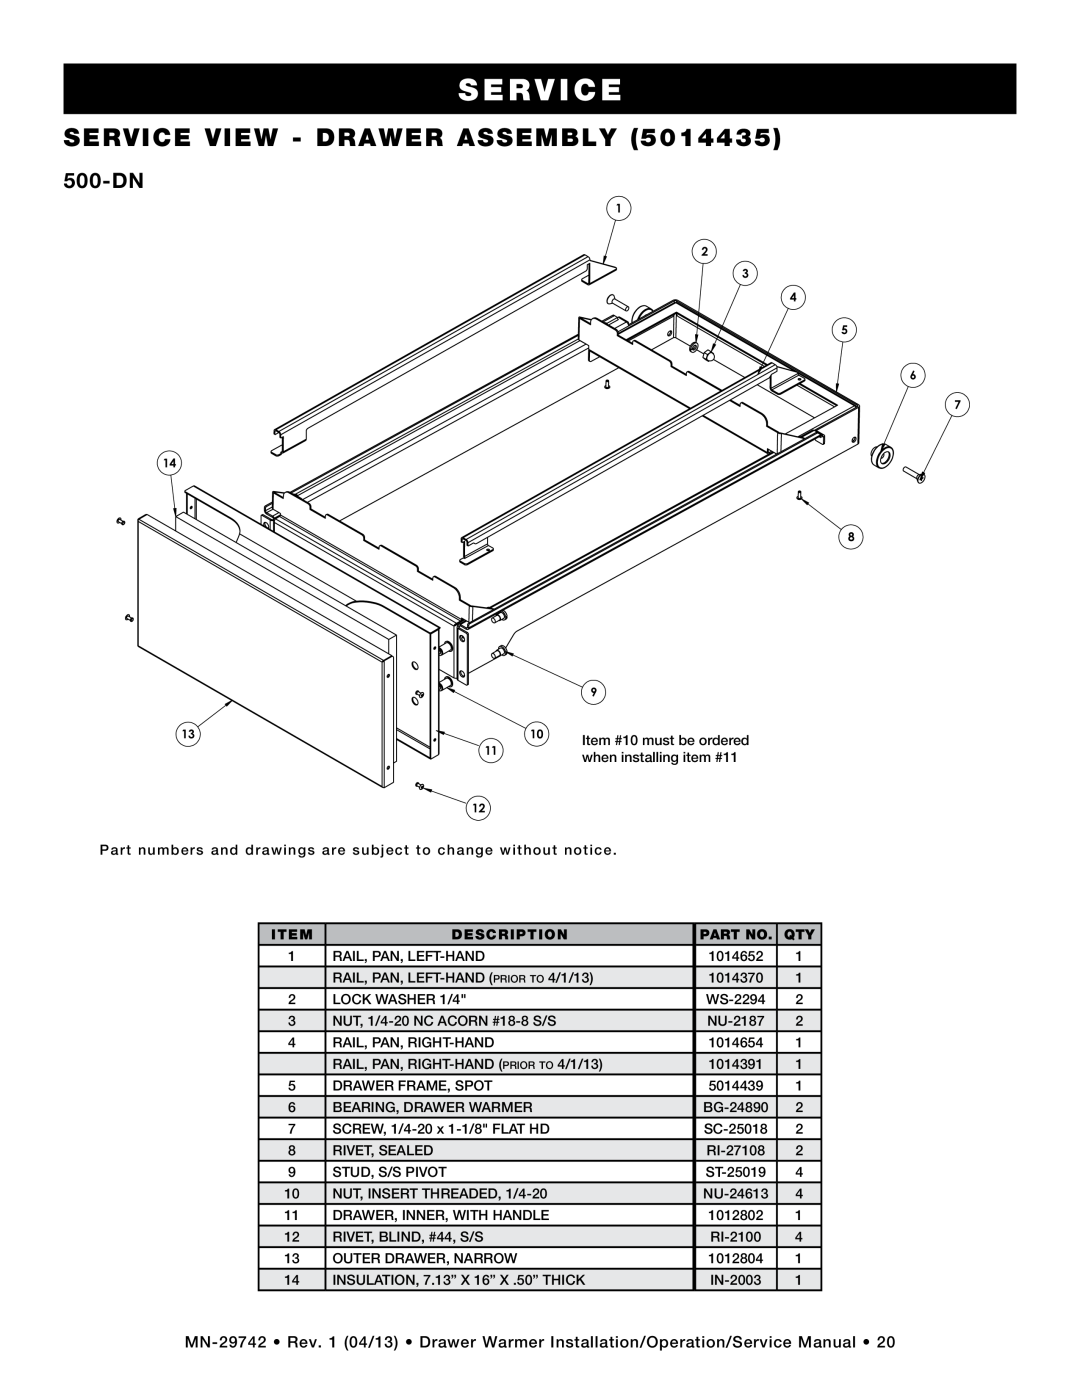 Alto-Shaam 3DN, 500-3D, 500-1D, 2DN 500-DN, S Erv Ice, service view - drawer assembly, Item #10 must be ordered, Description 